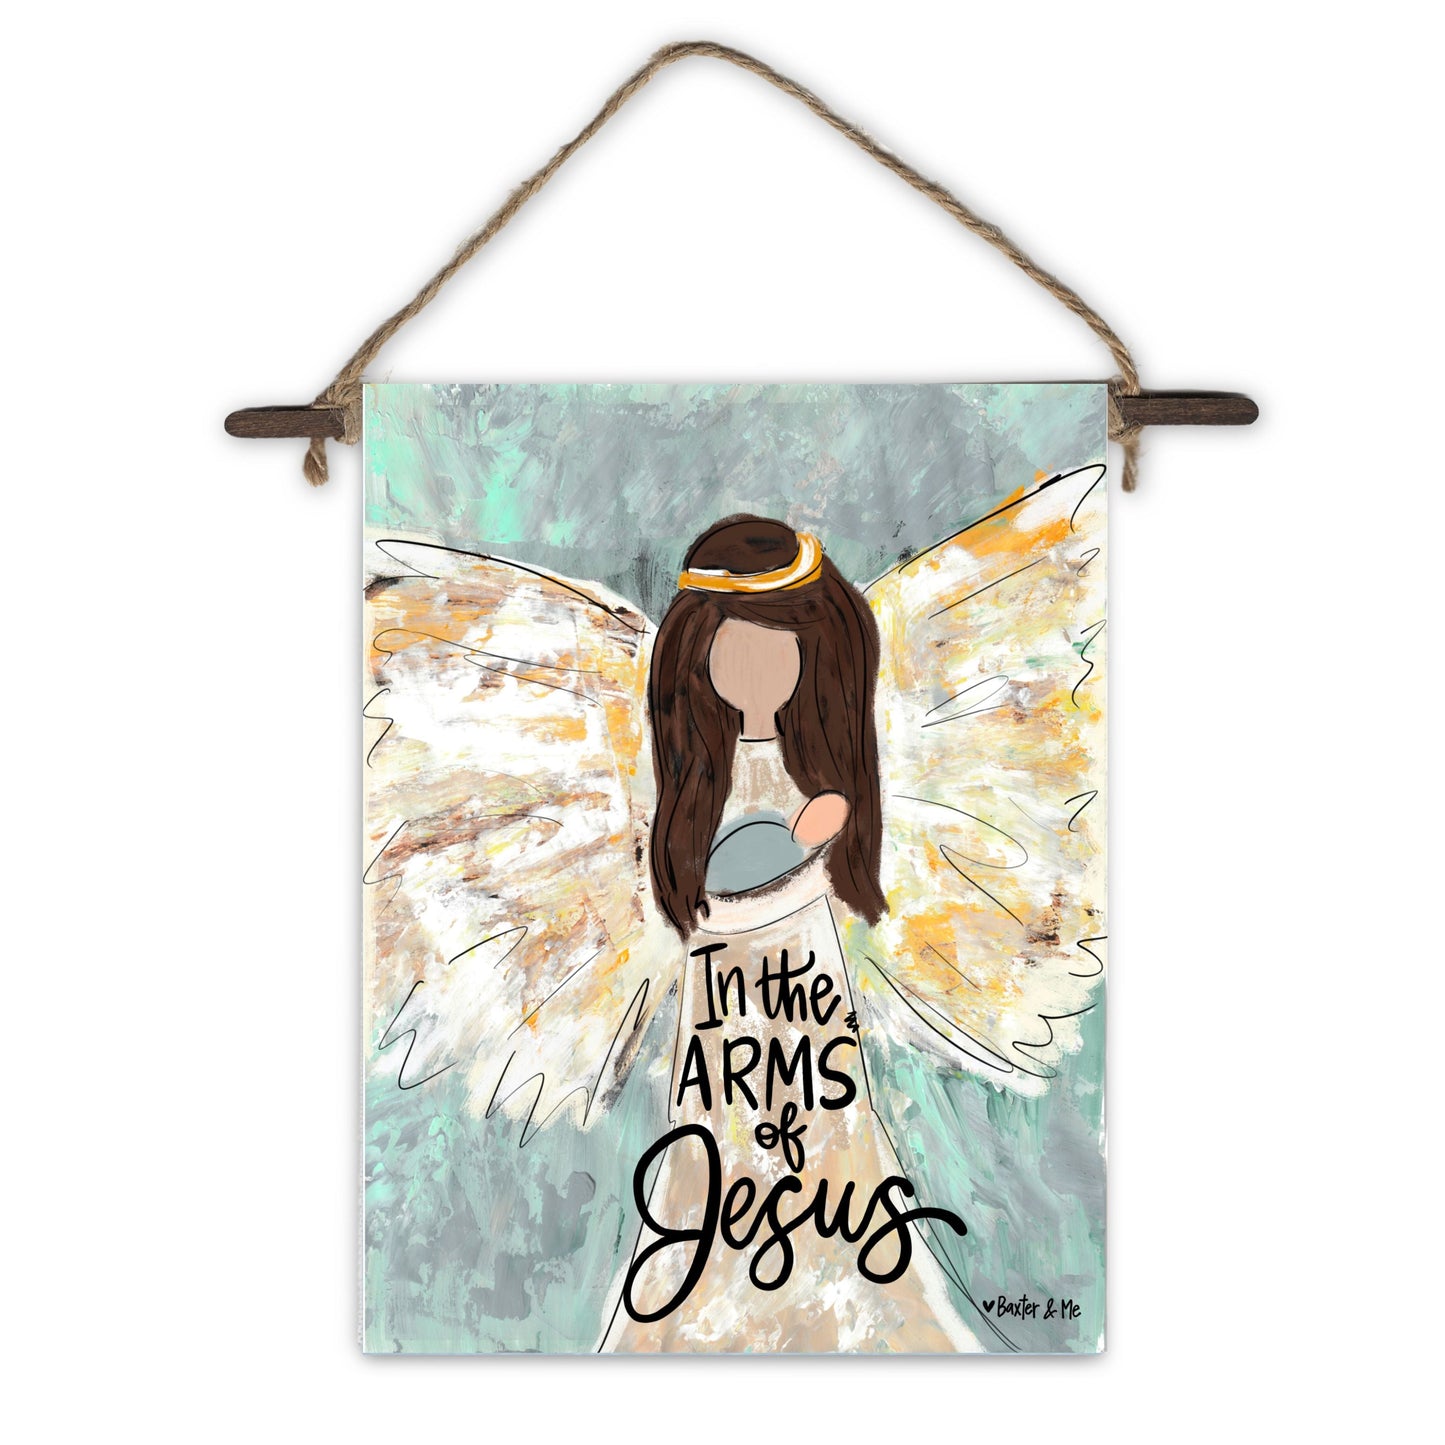 In the Arms of Jesus Mini Wall Hanging